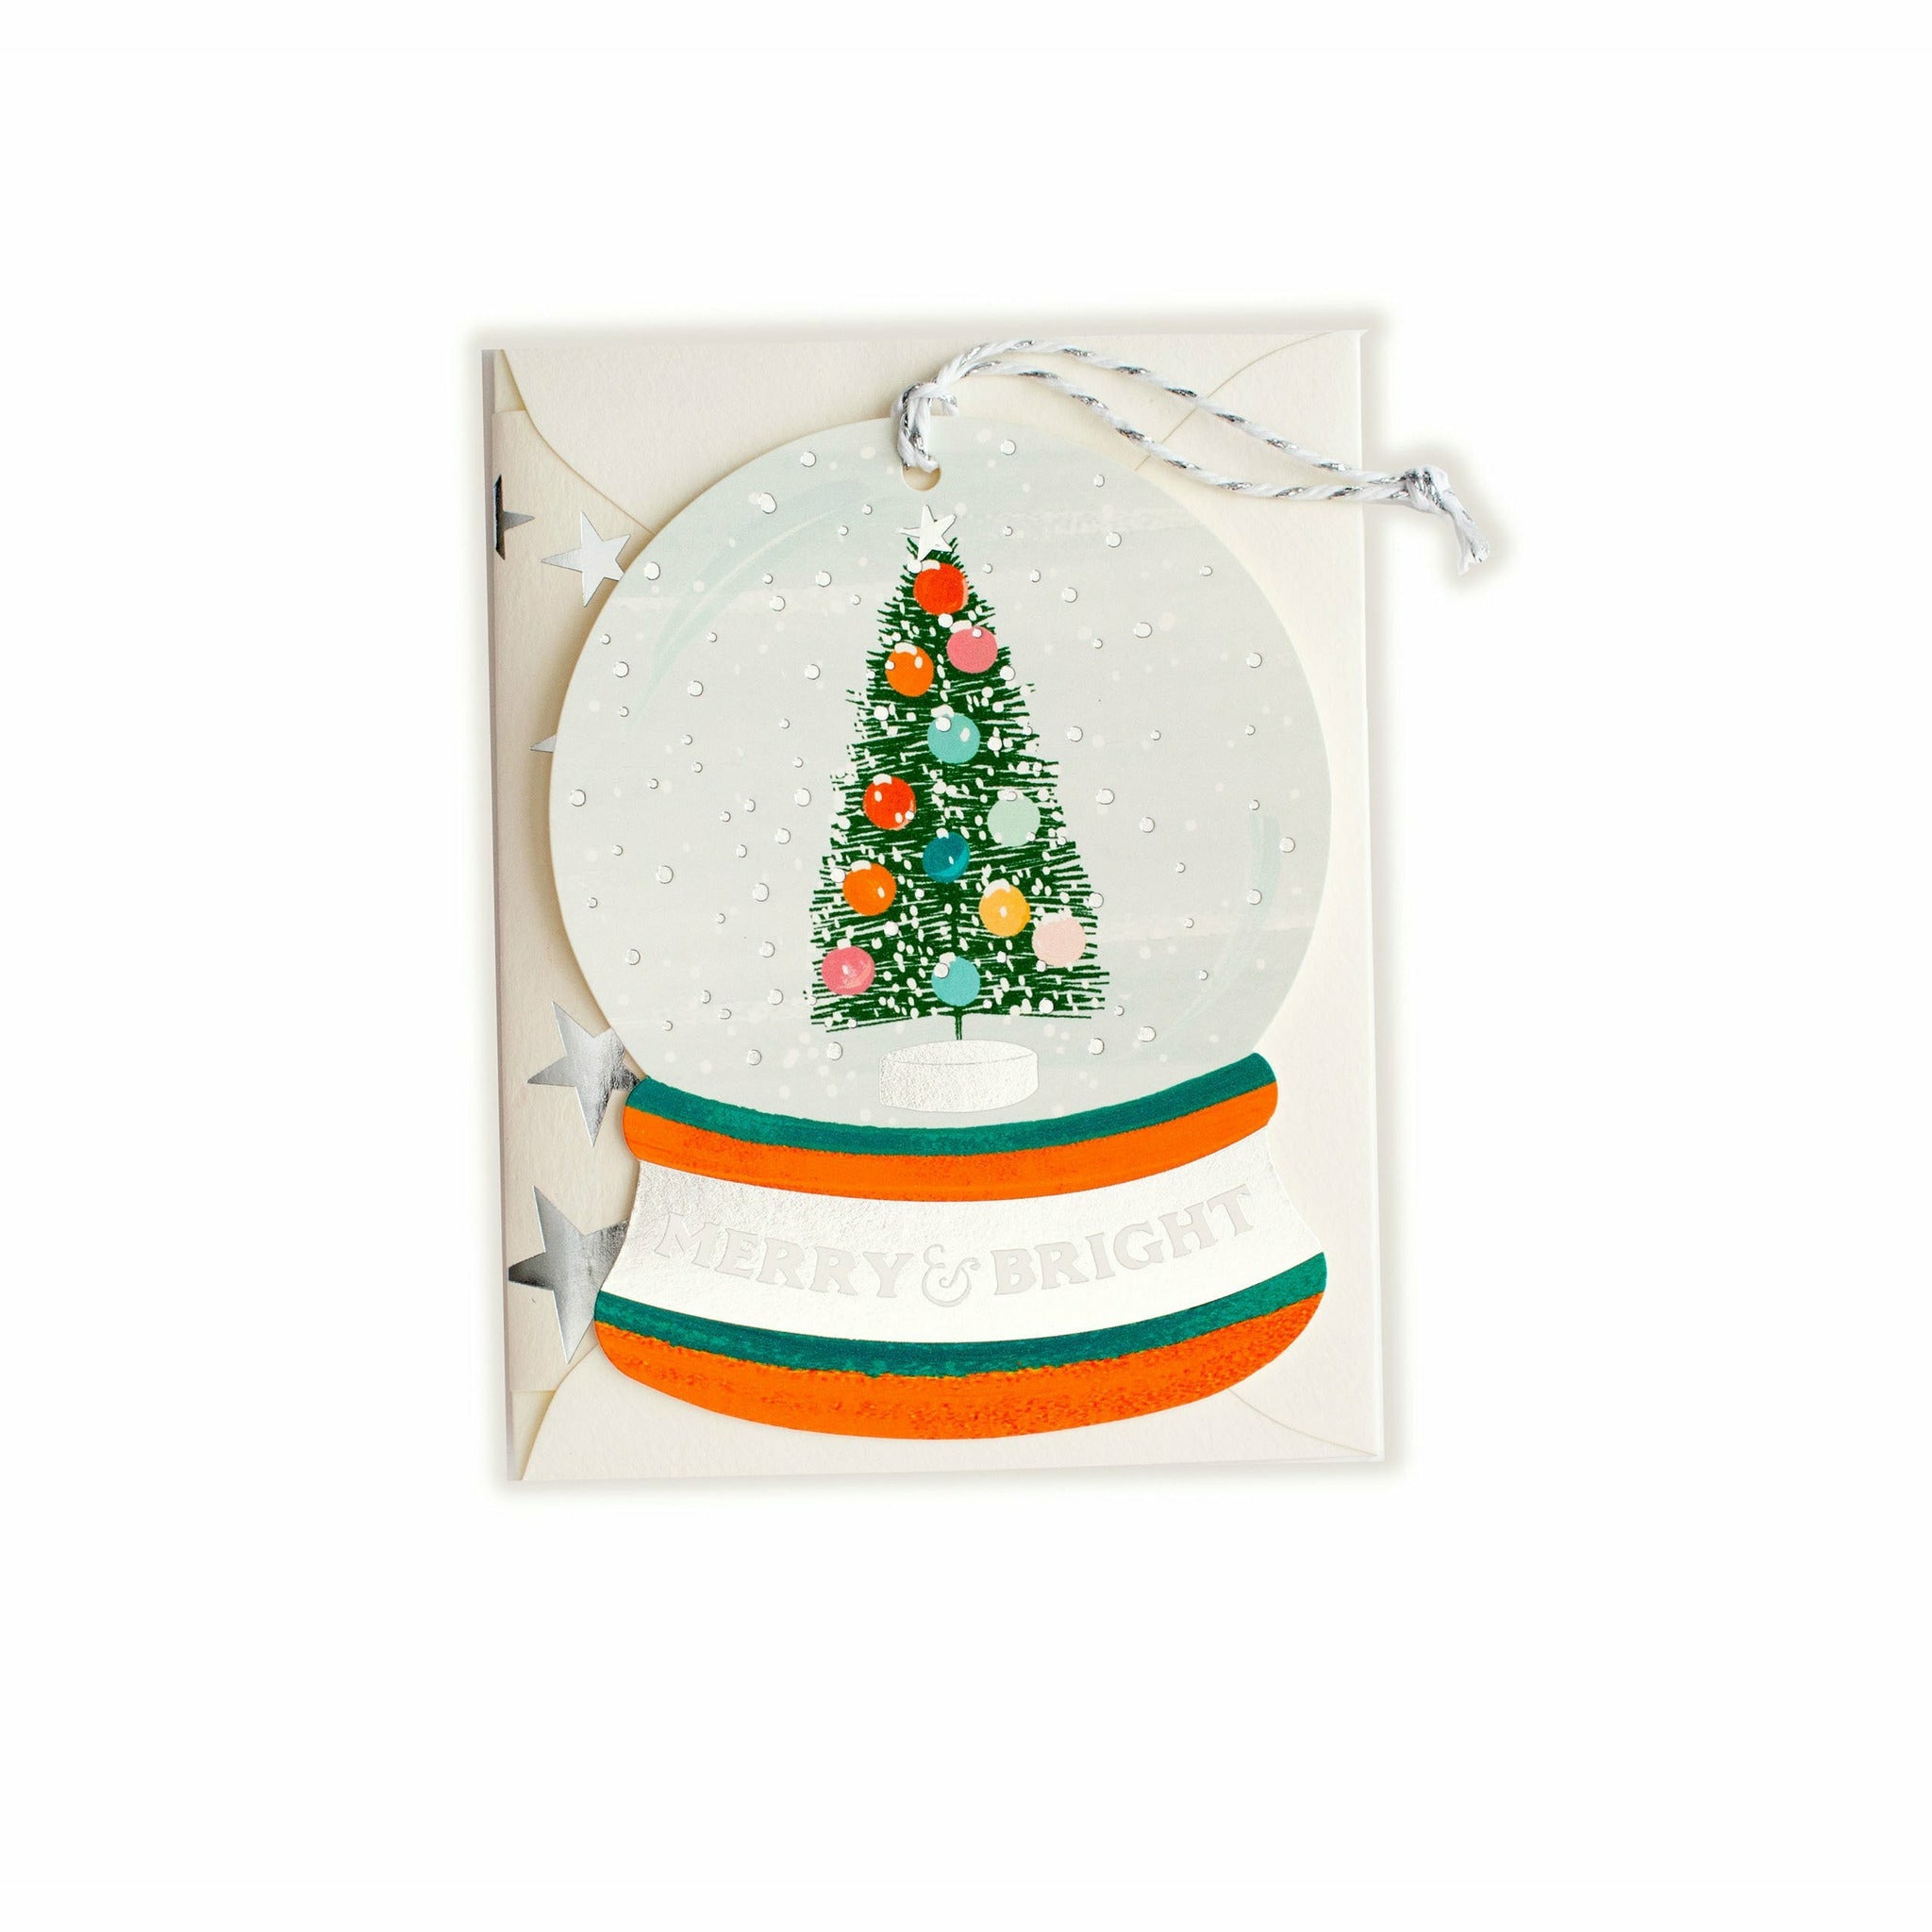 Bright Christmas tree snow globe holiday card ornament, complete with an envelope. - The First Snow